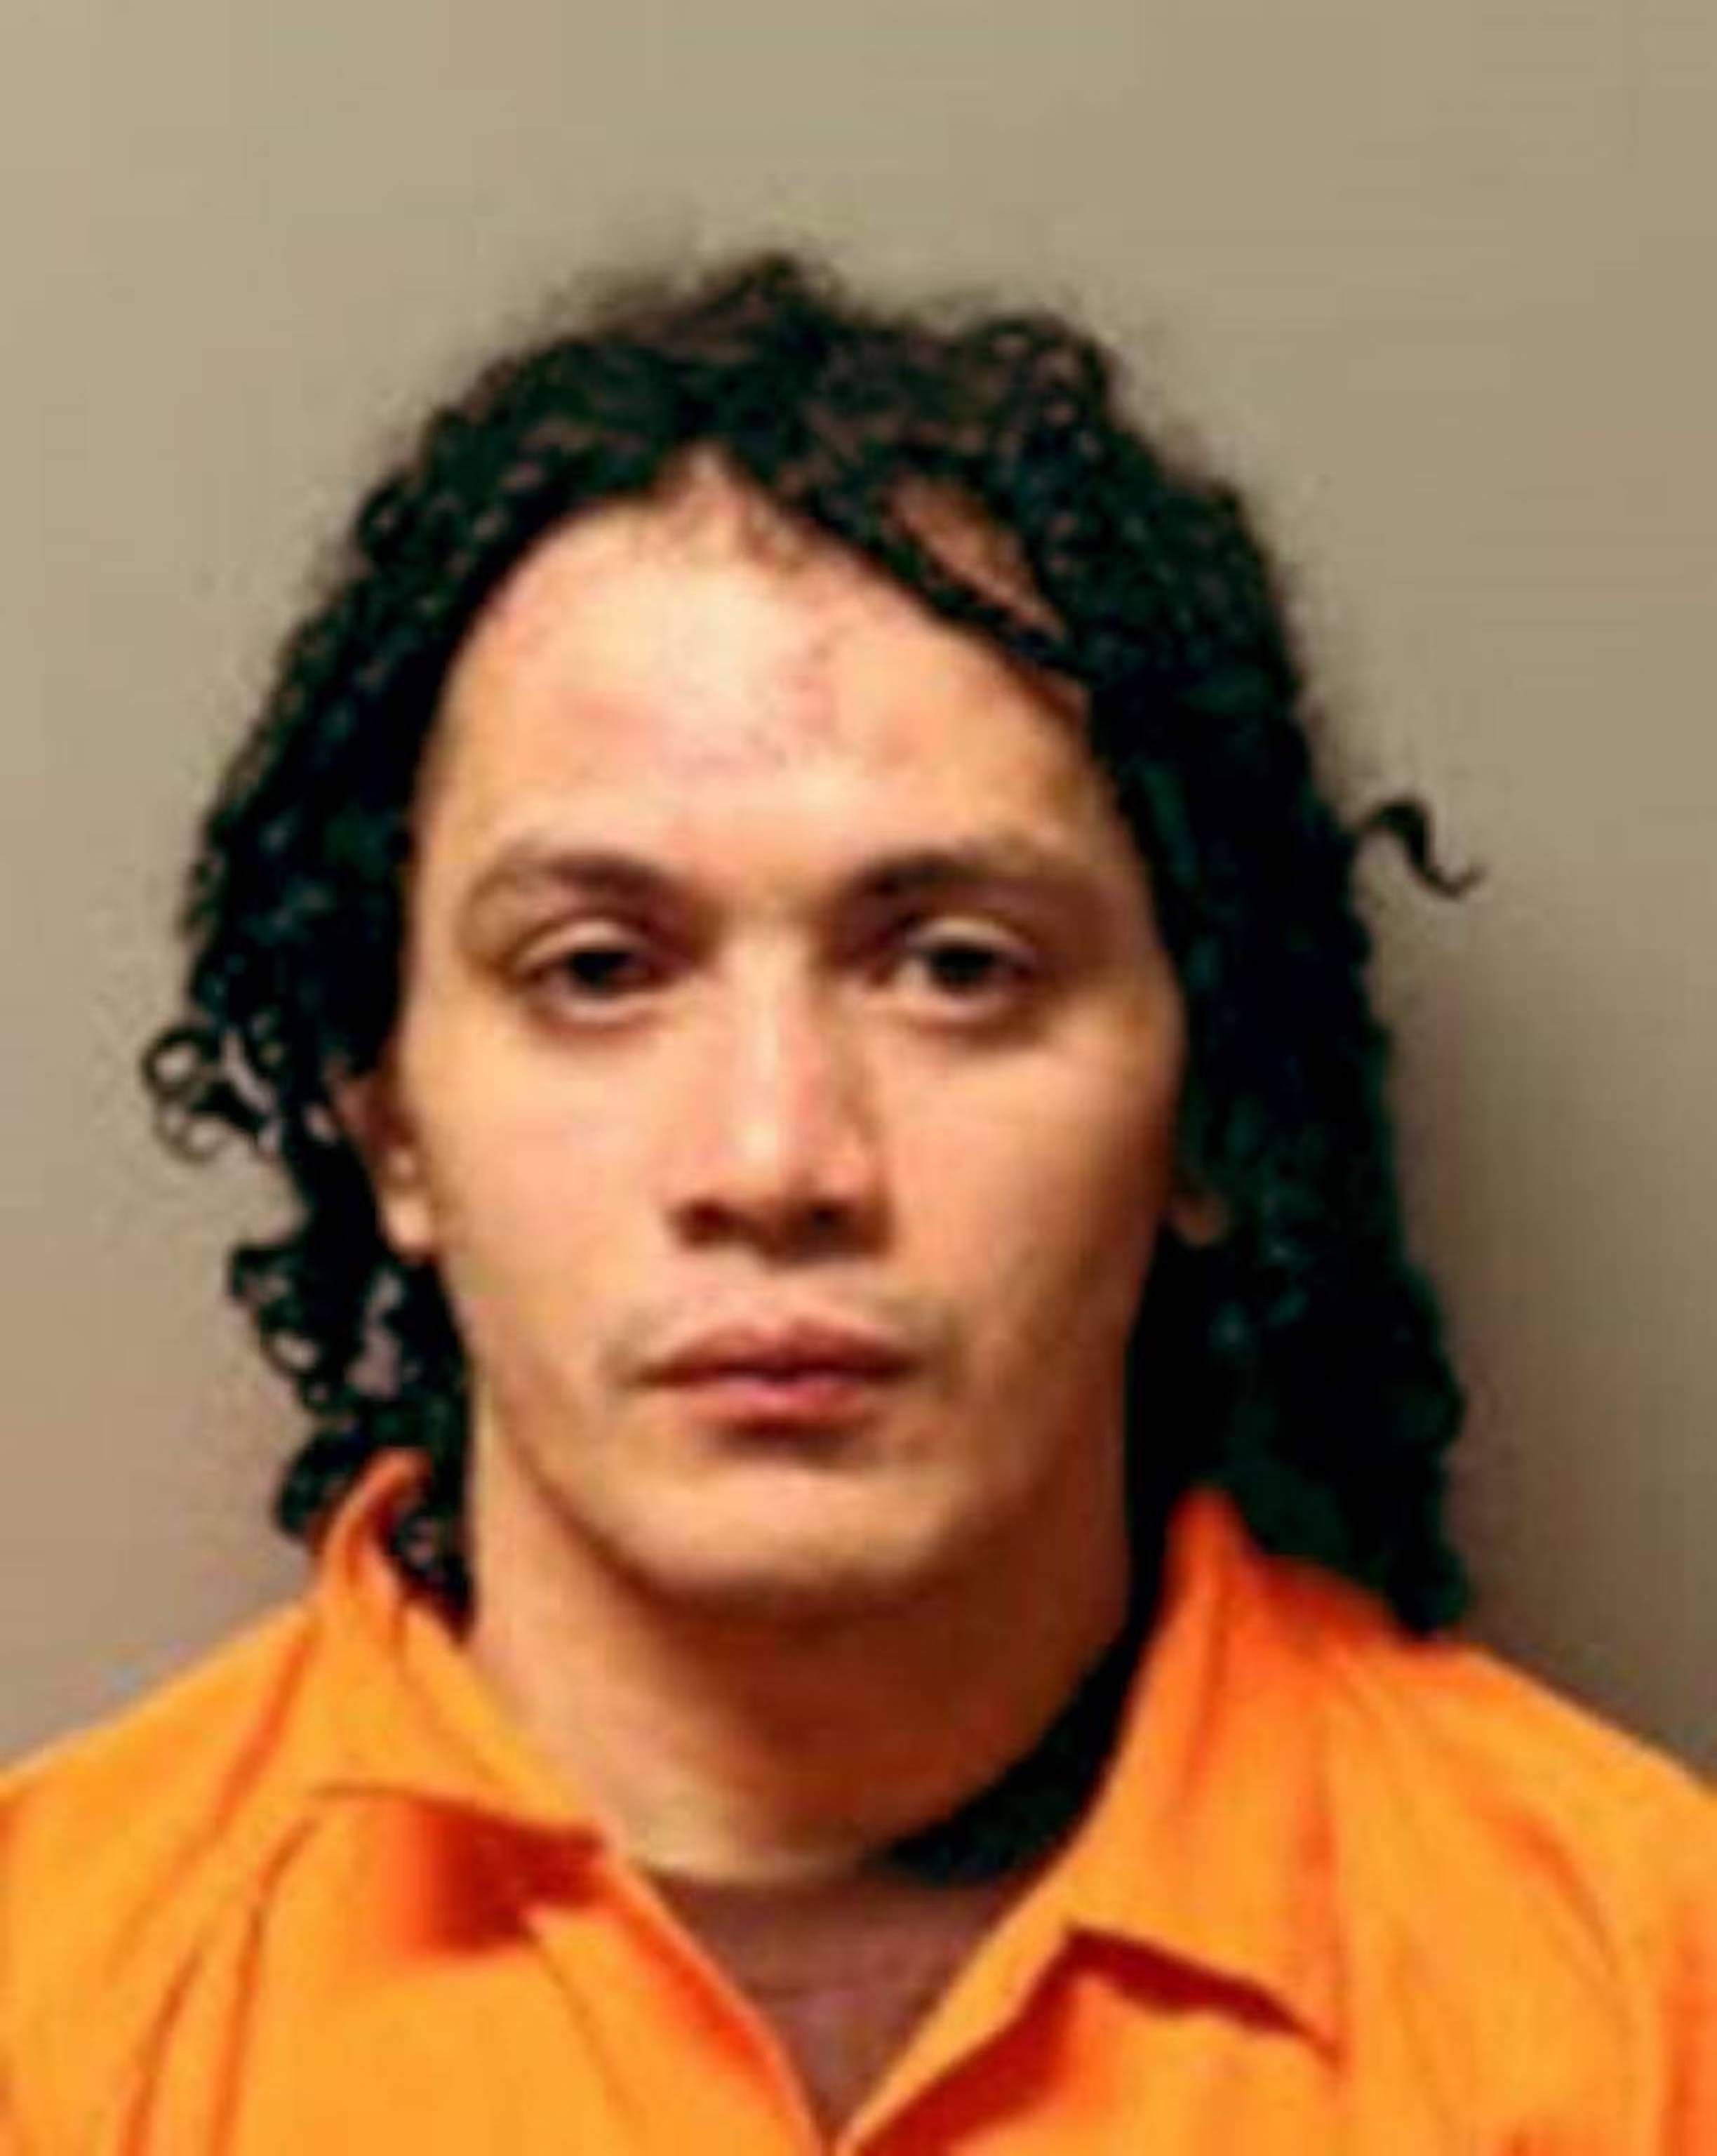 Danelo Cavalcante in a photo released by the Pennsylvania Department of Corrections.